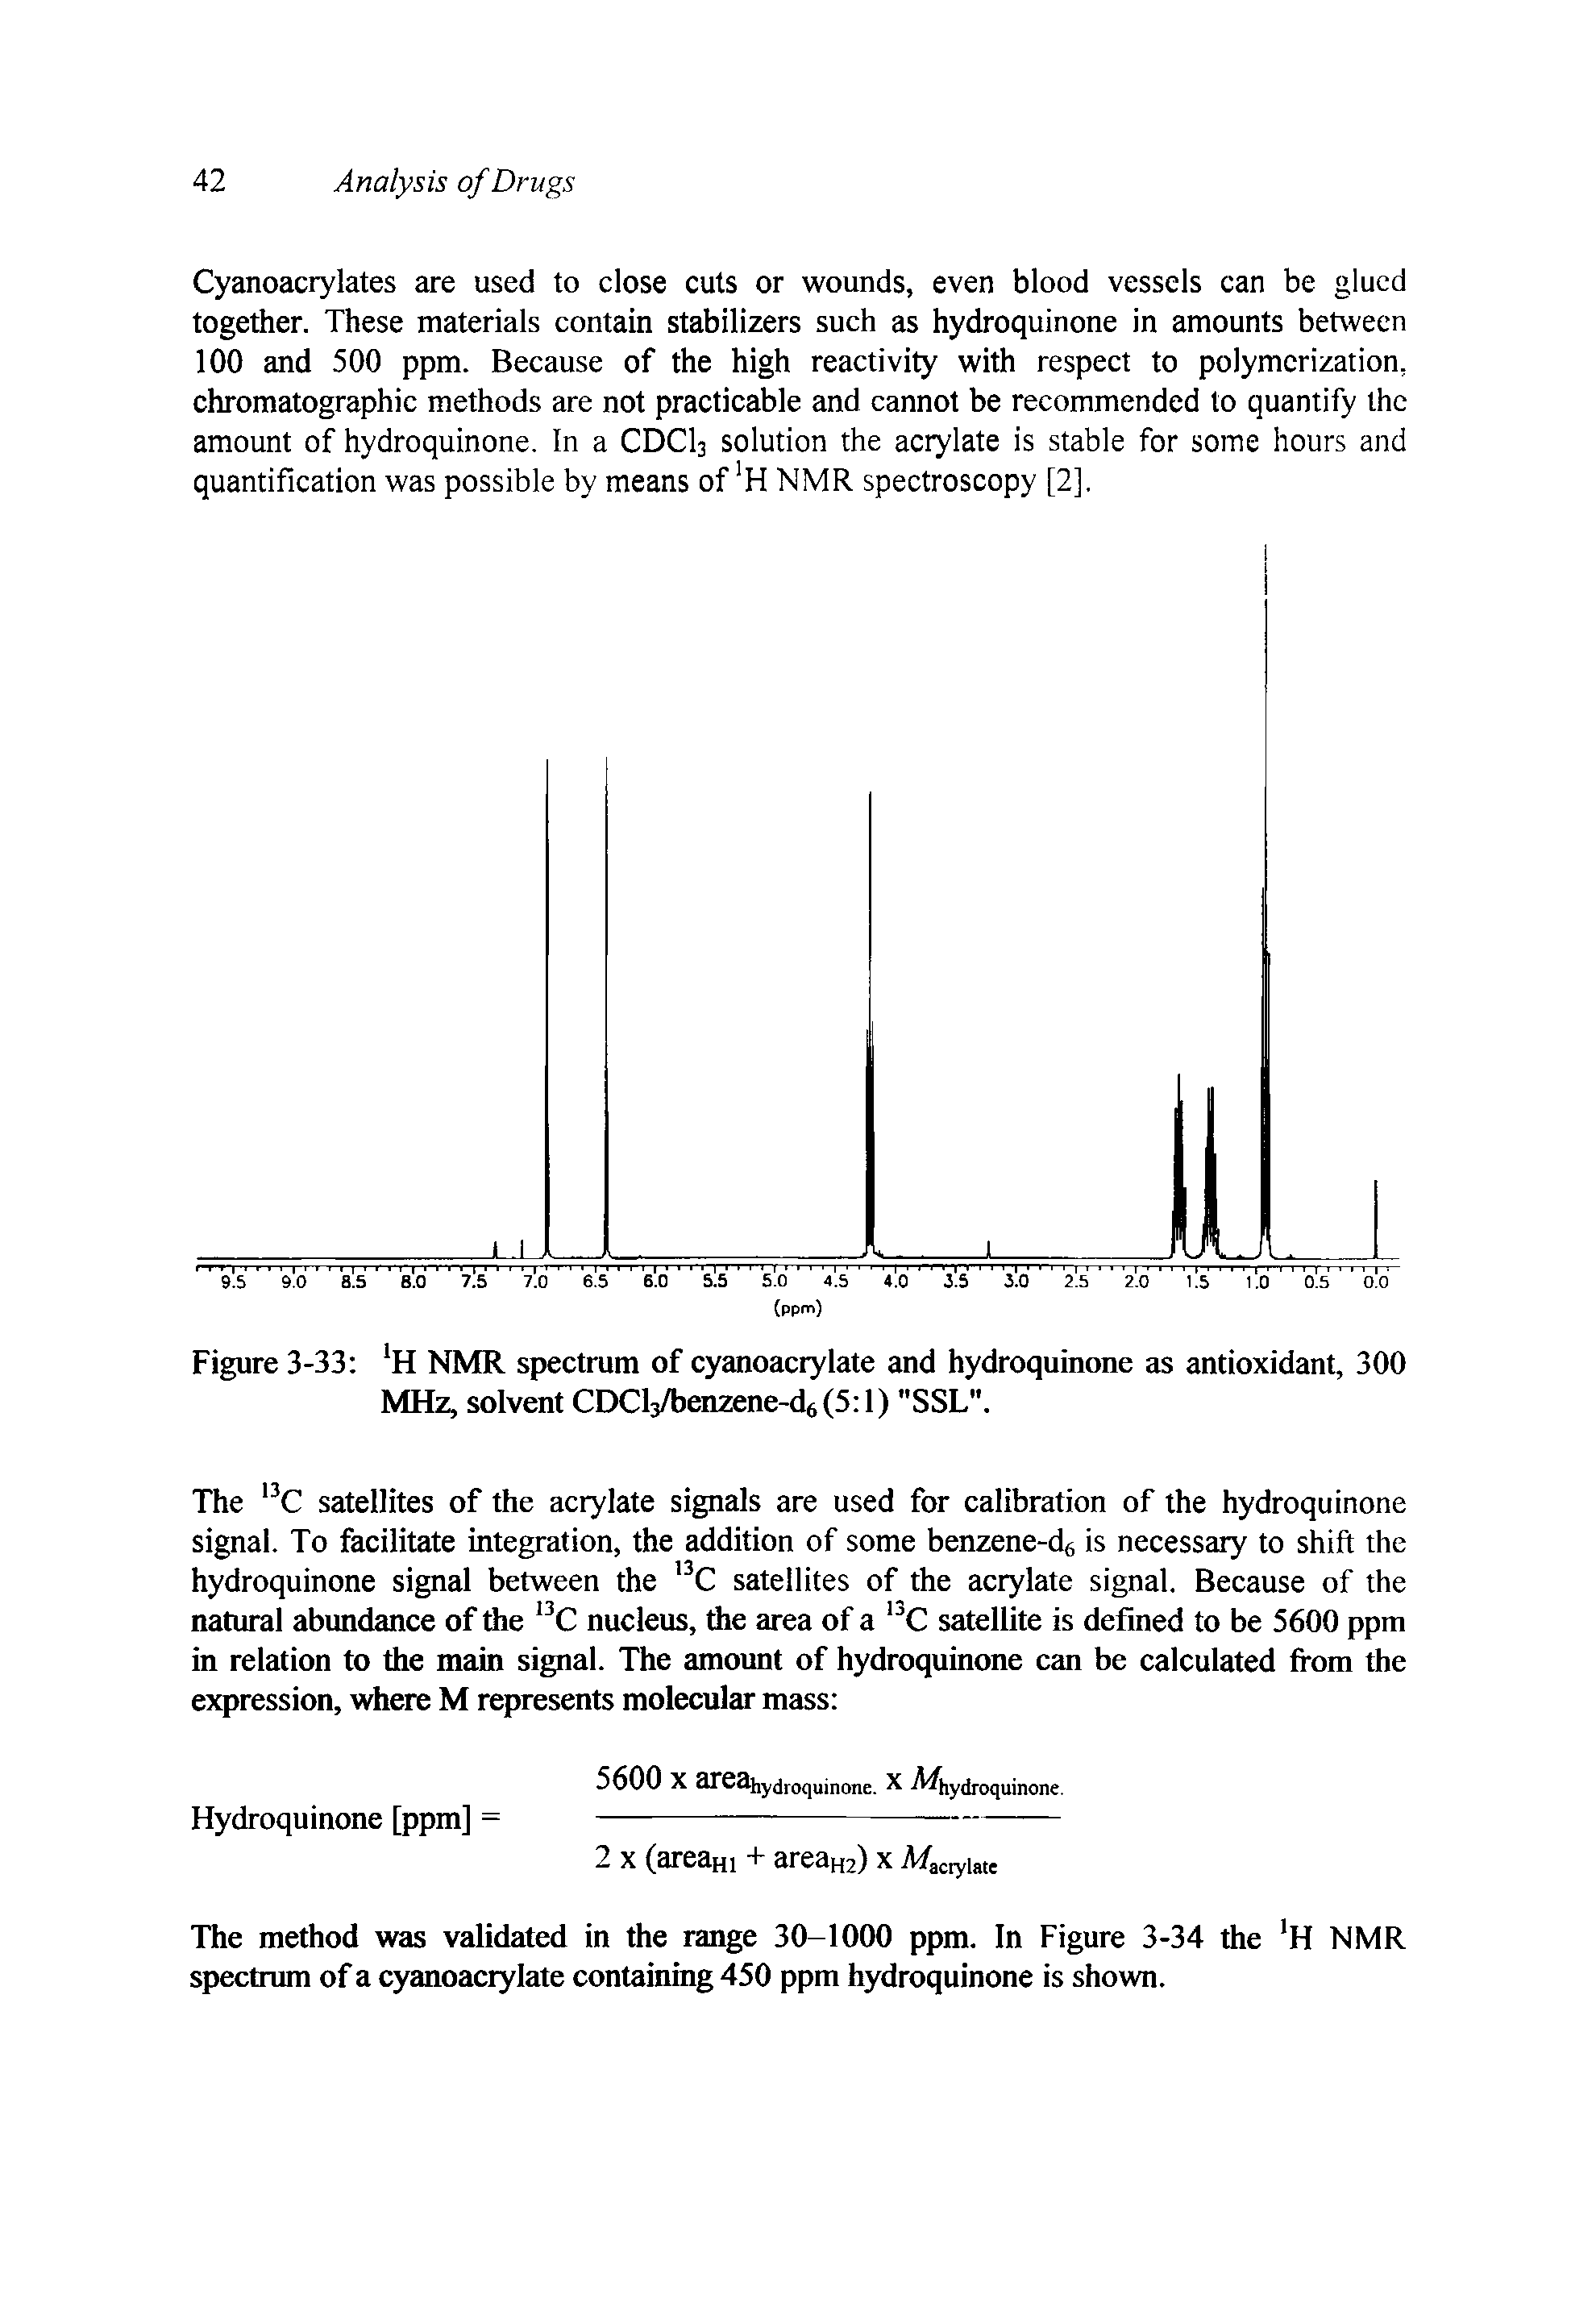 Figure 3-33 H NMR spectrum of cyanoacrylate and hydroquinone as antioxidant, 300 MHz, solvent CDCl3 enzene-d6(5 l) "SSL".